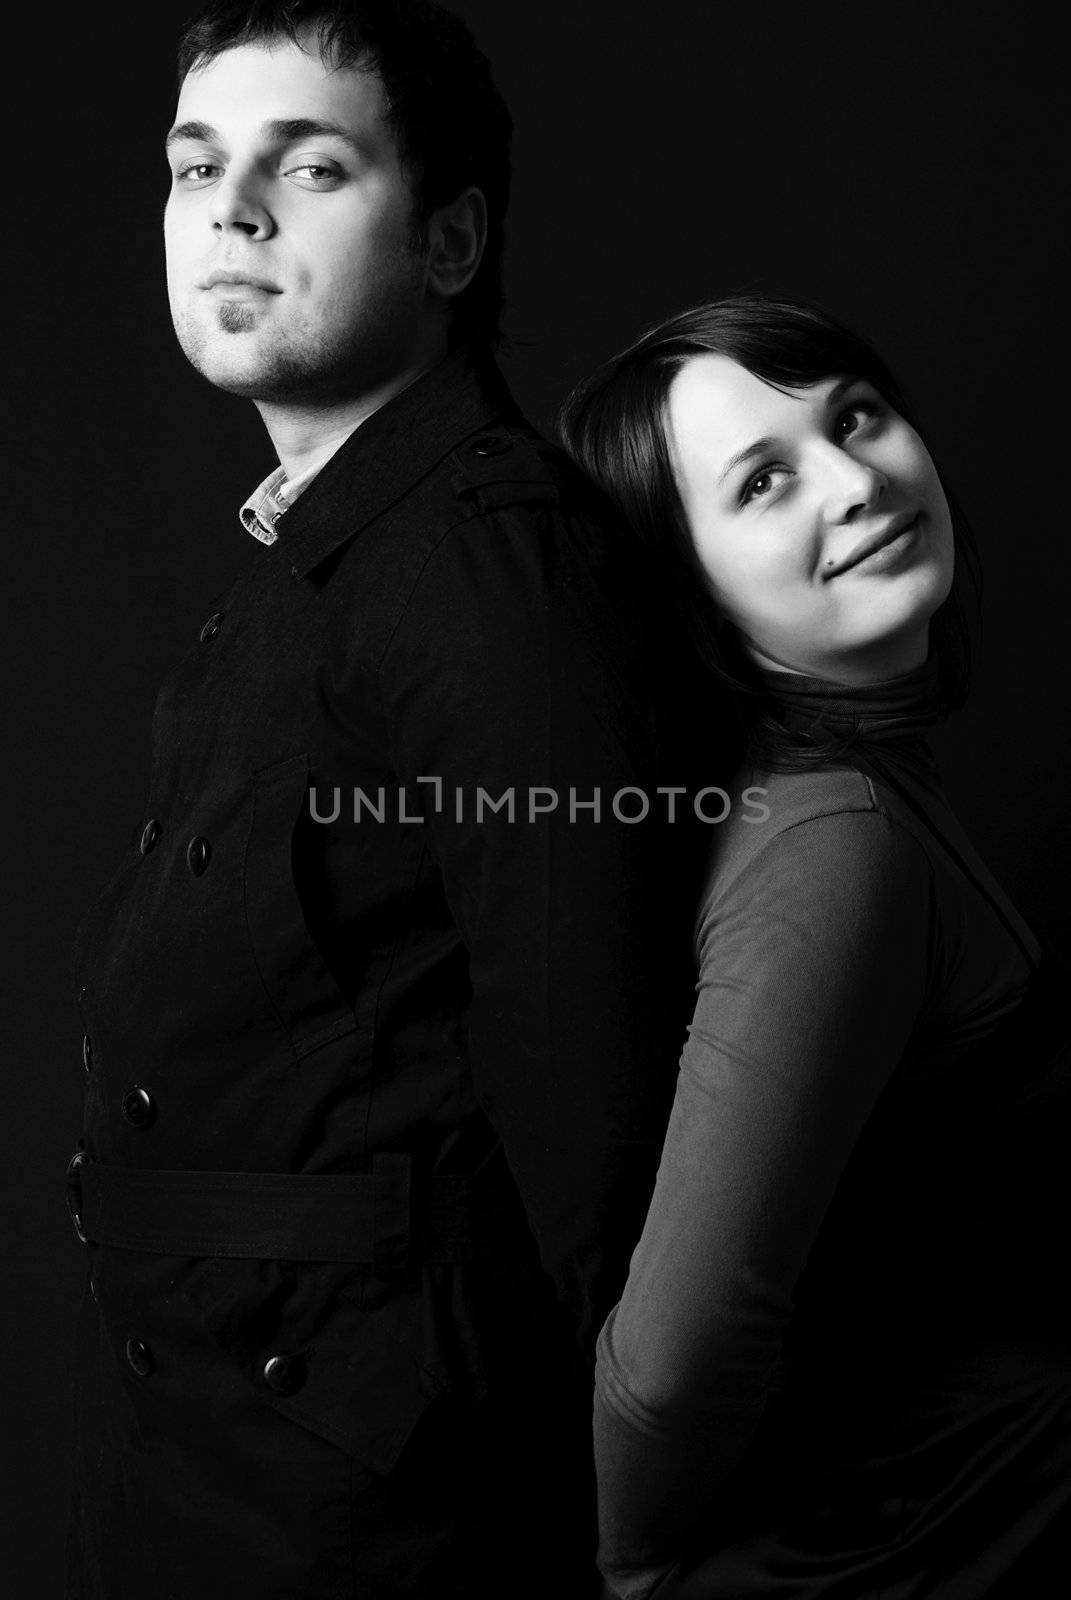 black and white studio portrait of a serious man and a dreamy young woman standing back to back